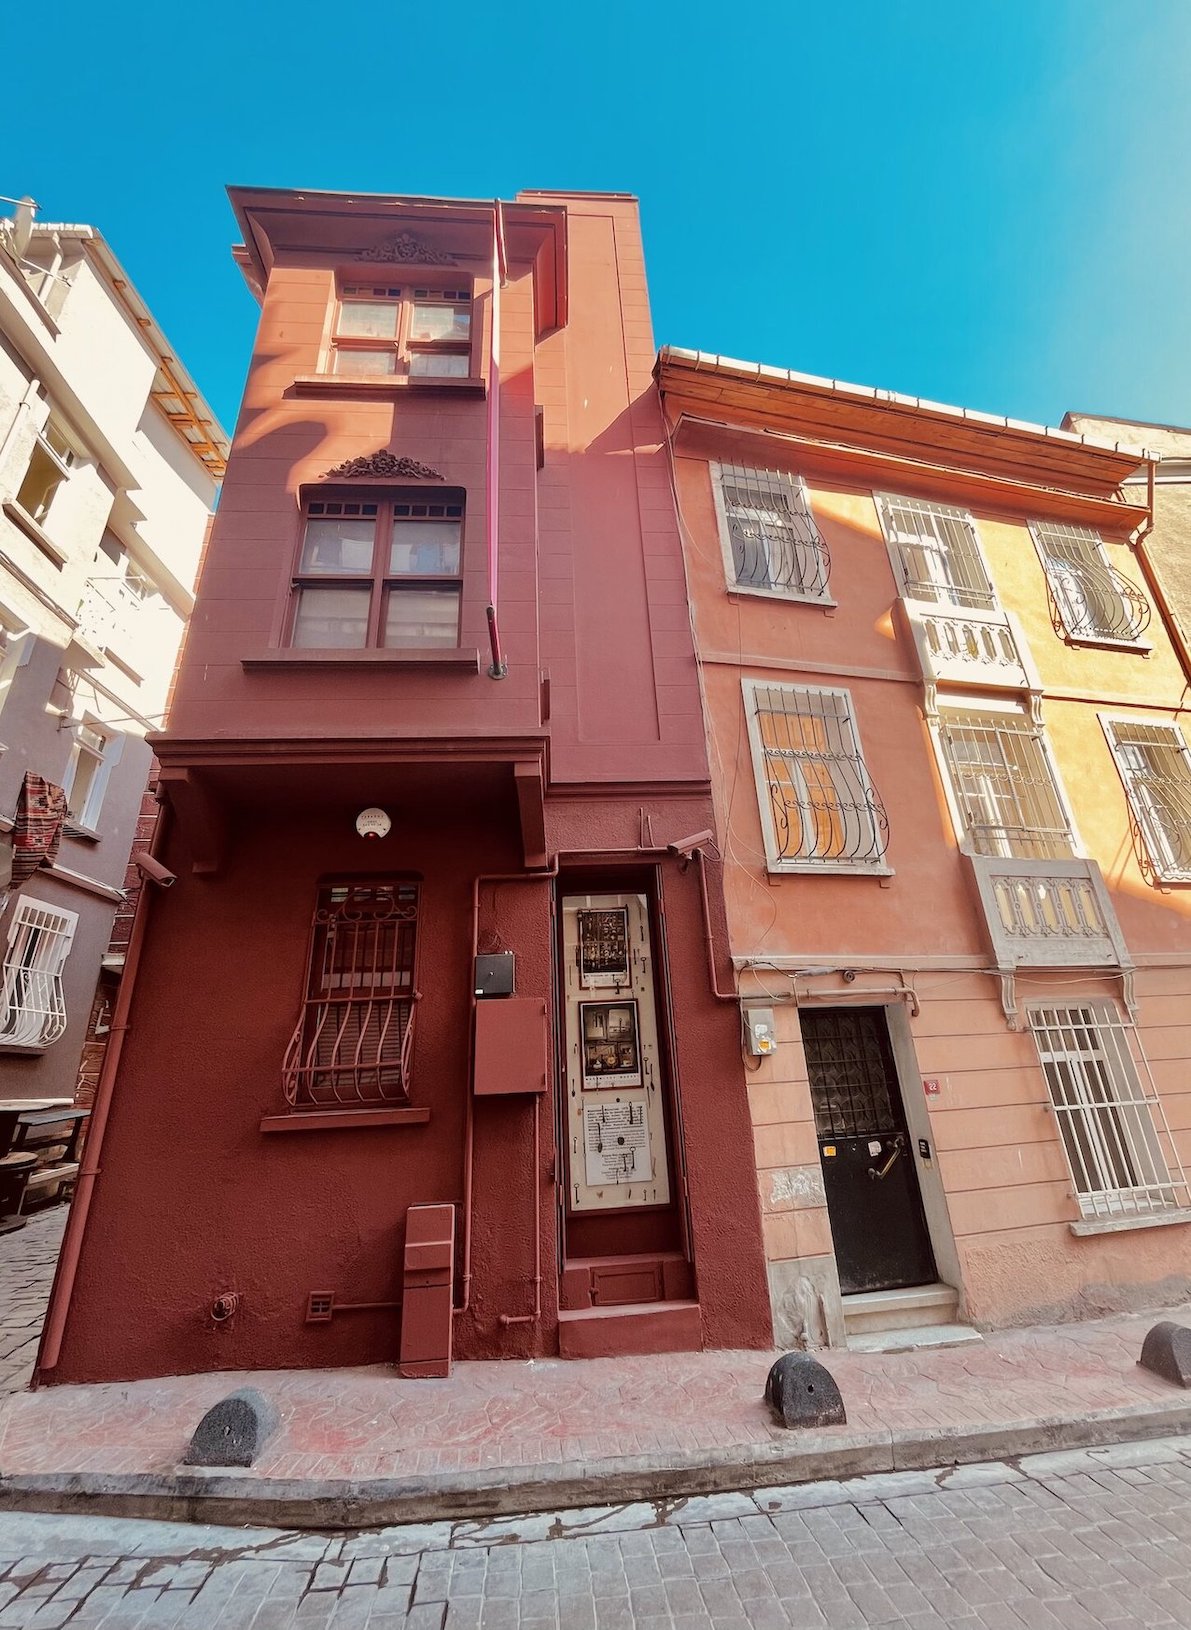 A visit to Istanbul's Museum of Innocence